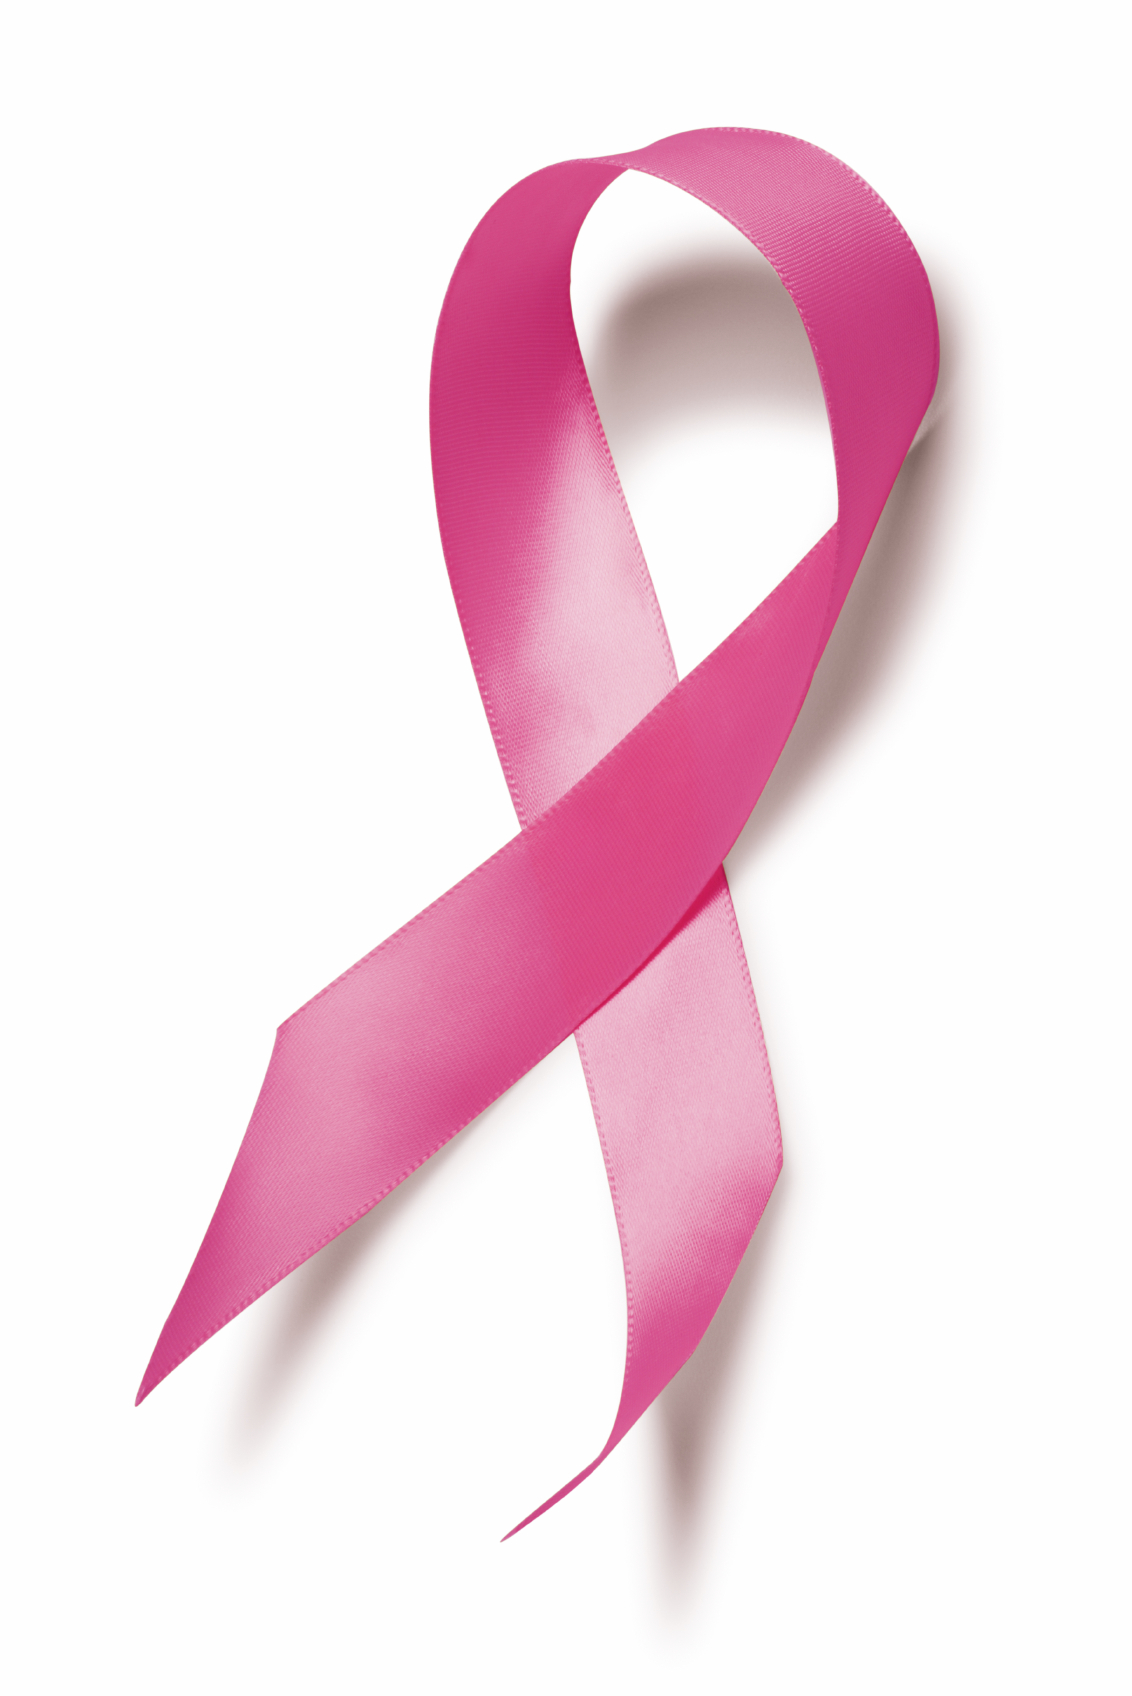 Printable Breast Cancer Ribbon - ClipArt Best